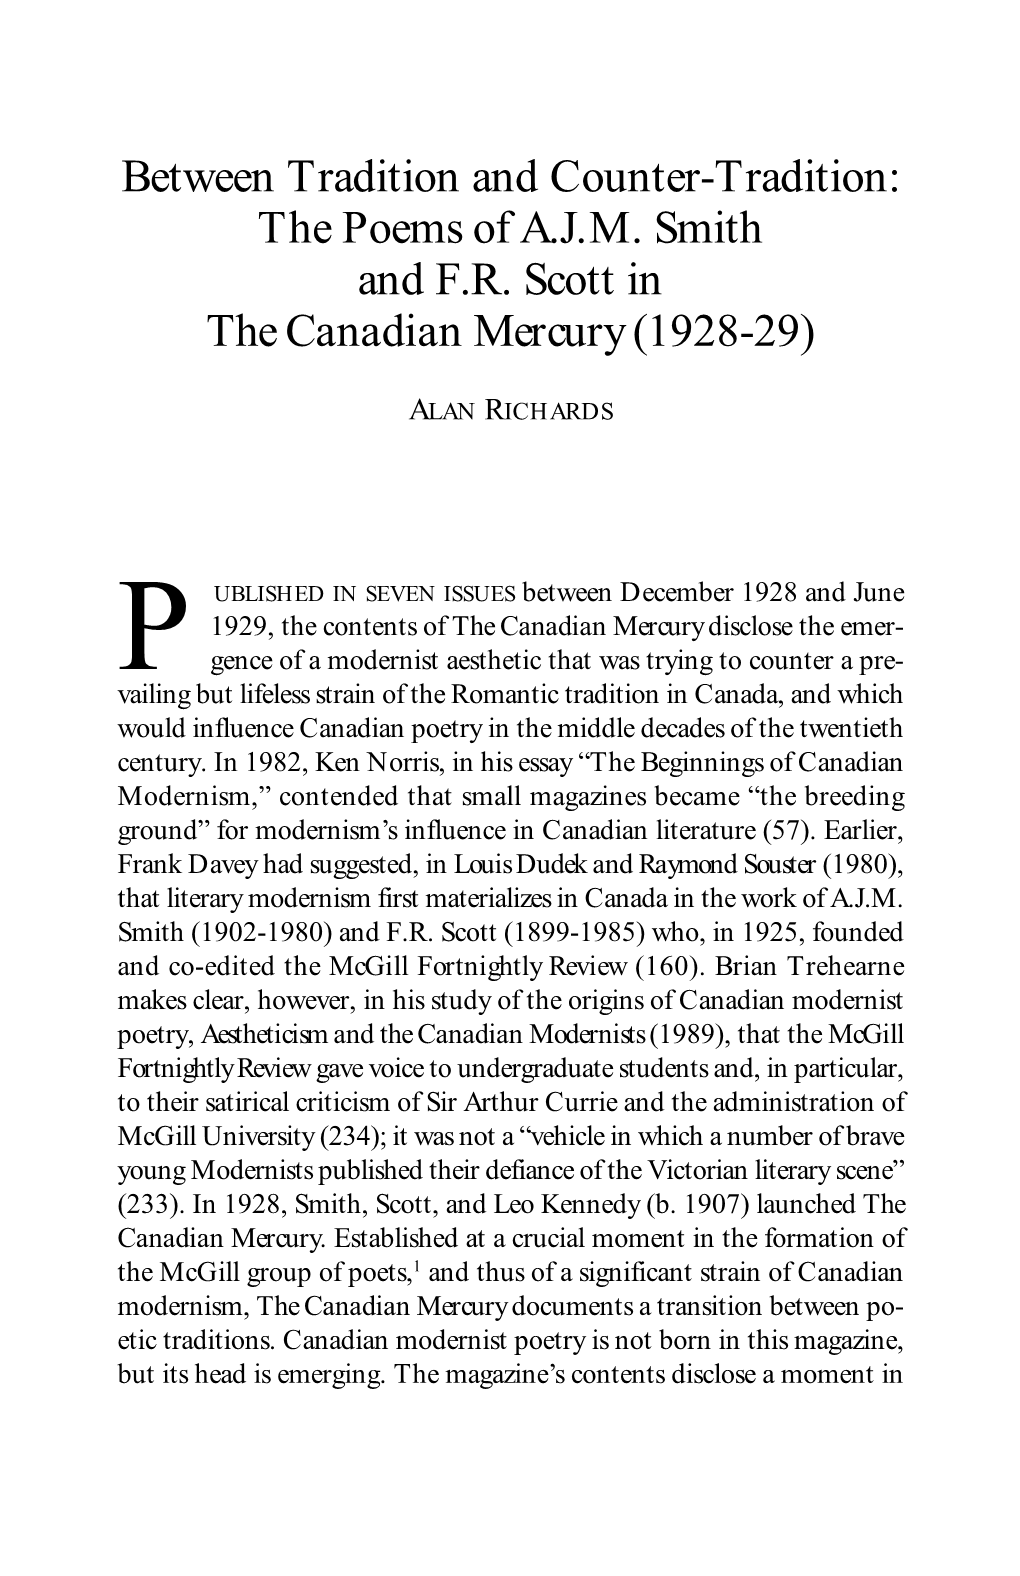 The Poems of AJM Smith and FR Scott in the Canadian Mercury